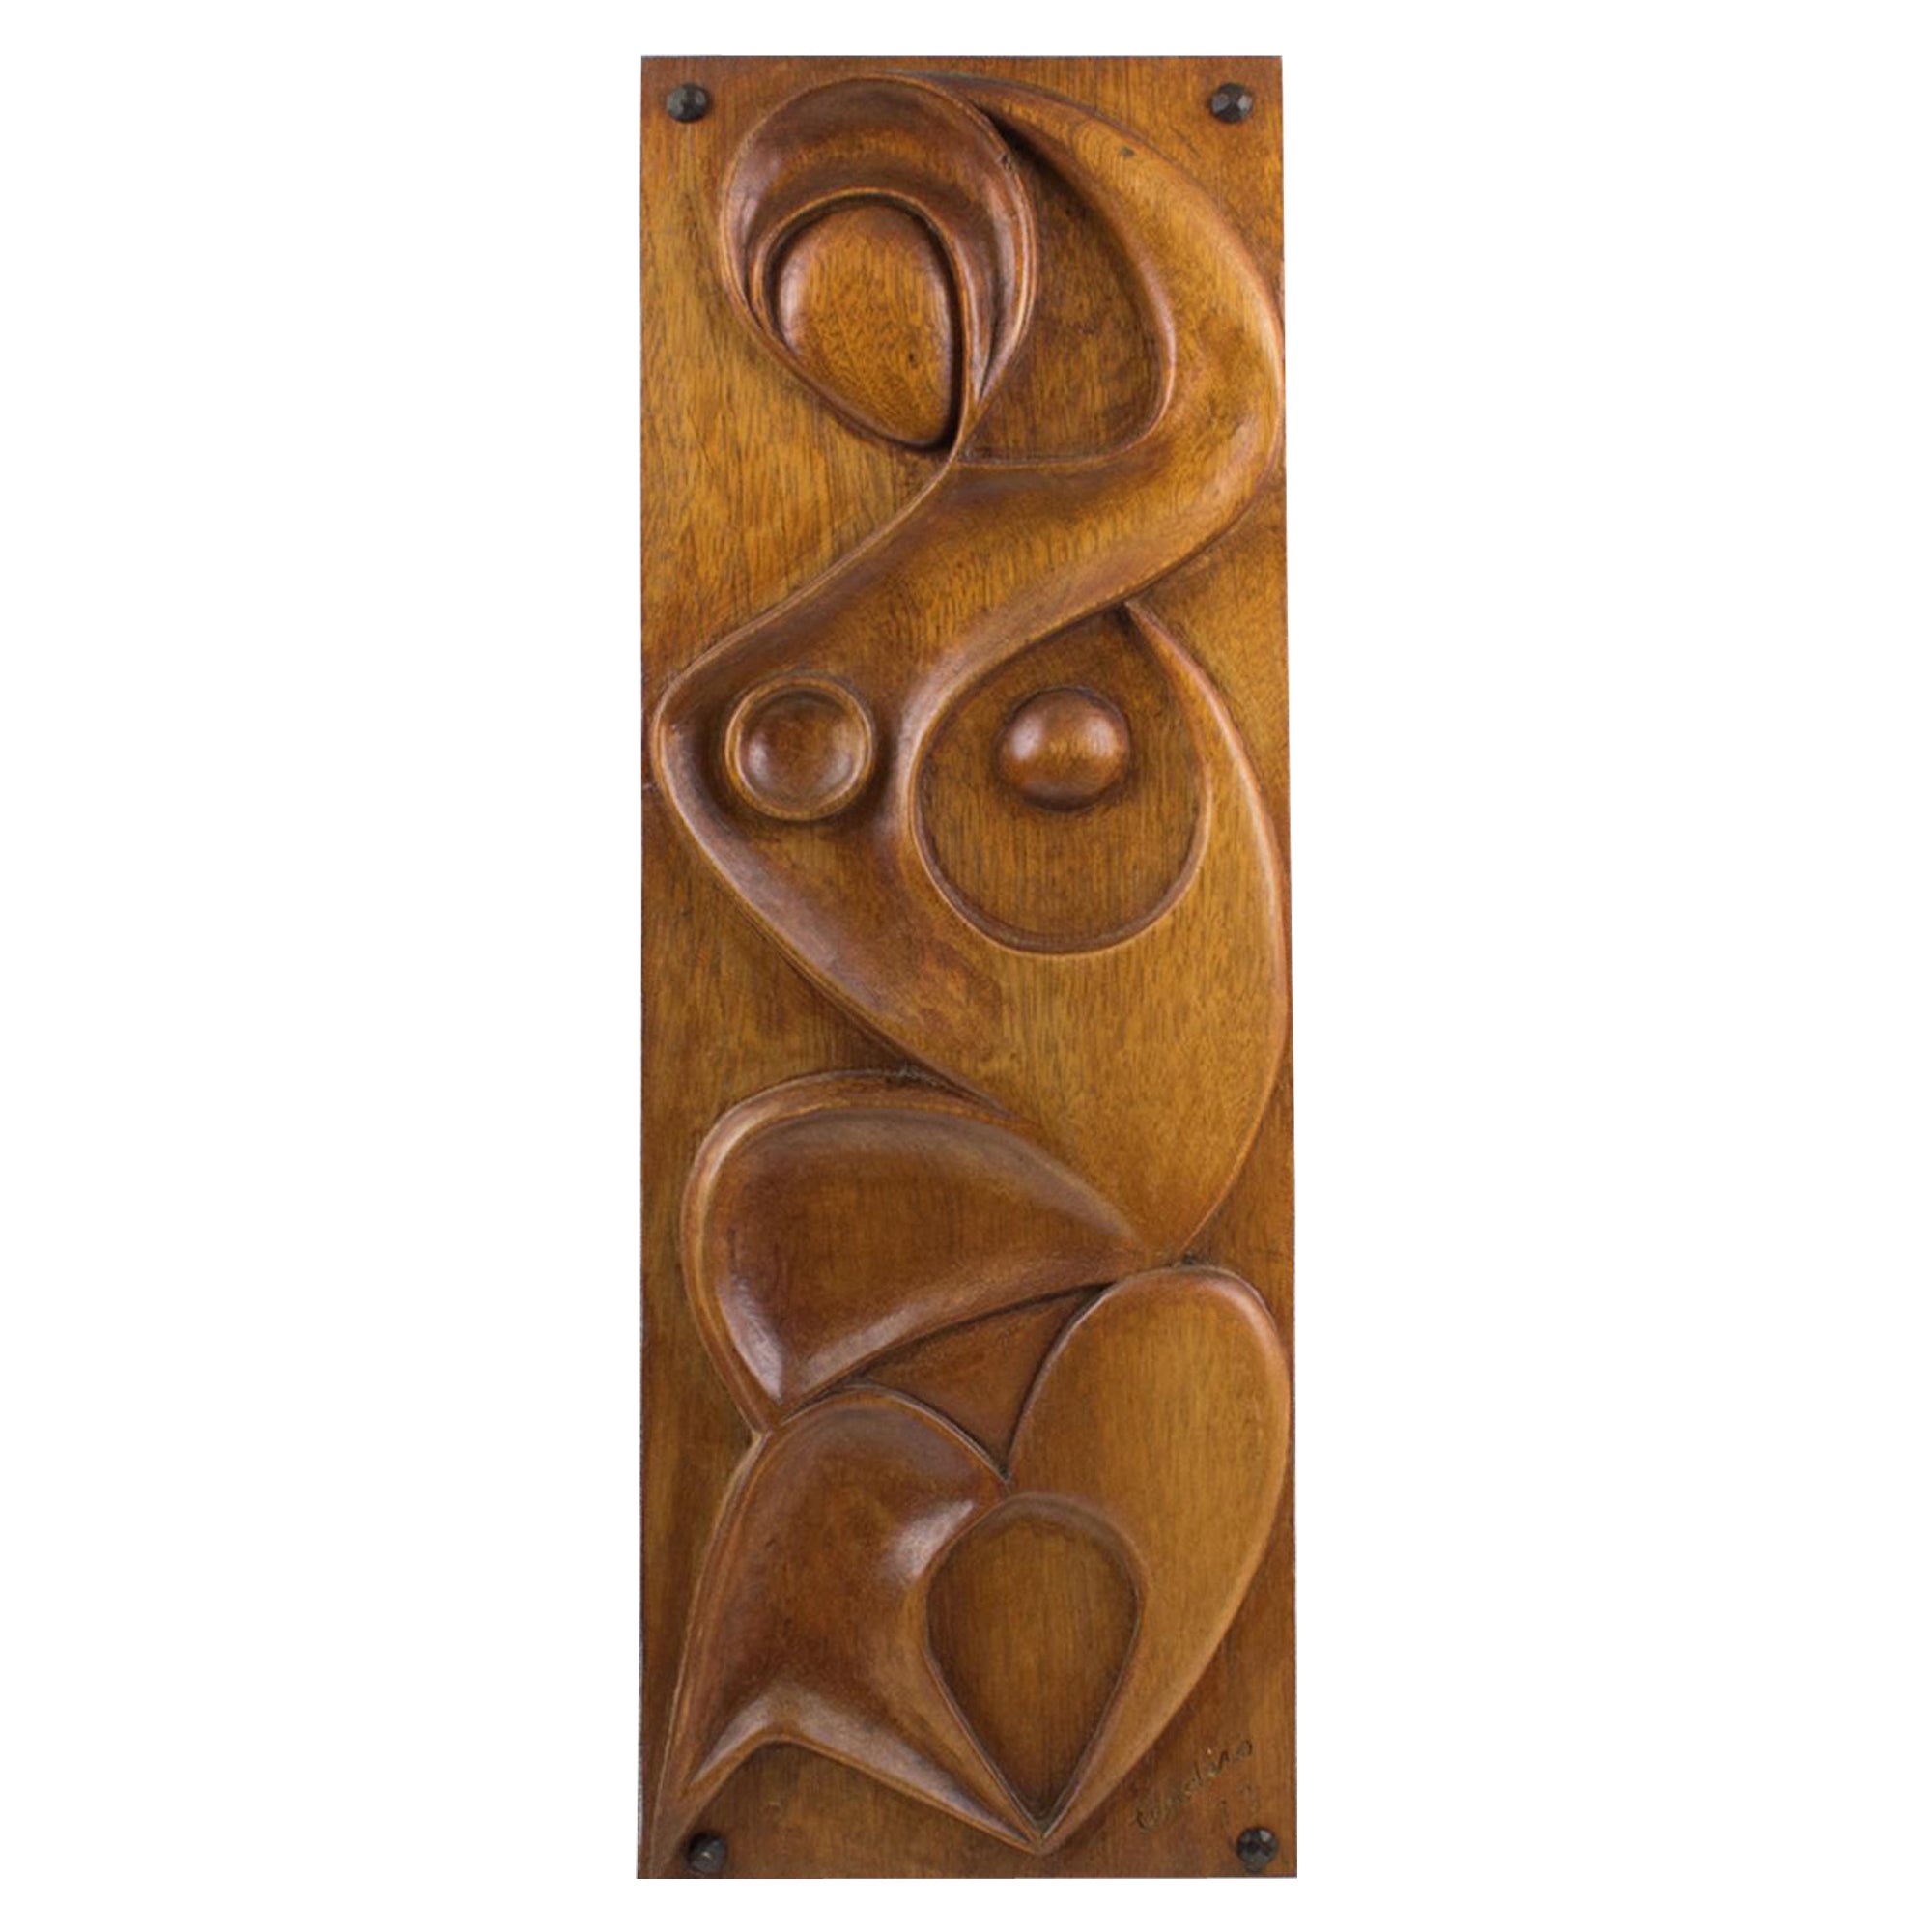 Maxime Tendero Wall-Mounted Abstract Carved Wood Art Panel Sculpture